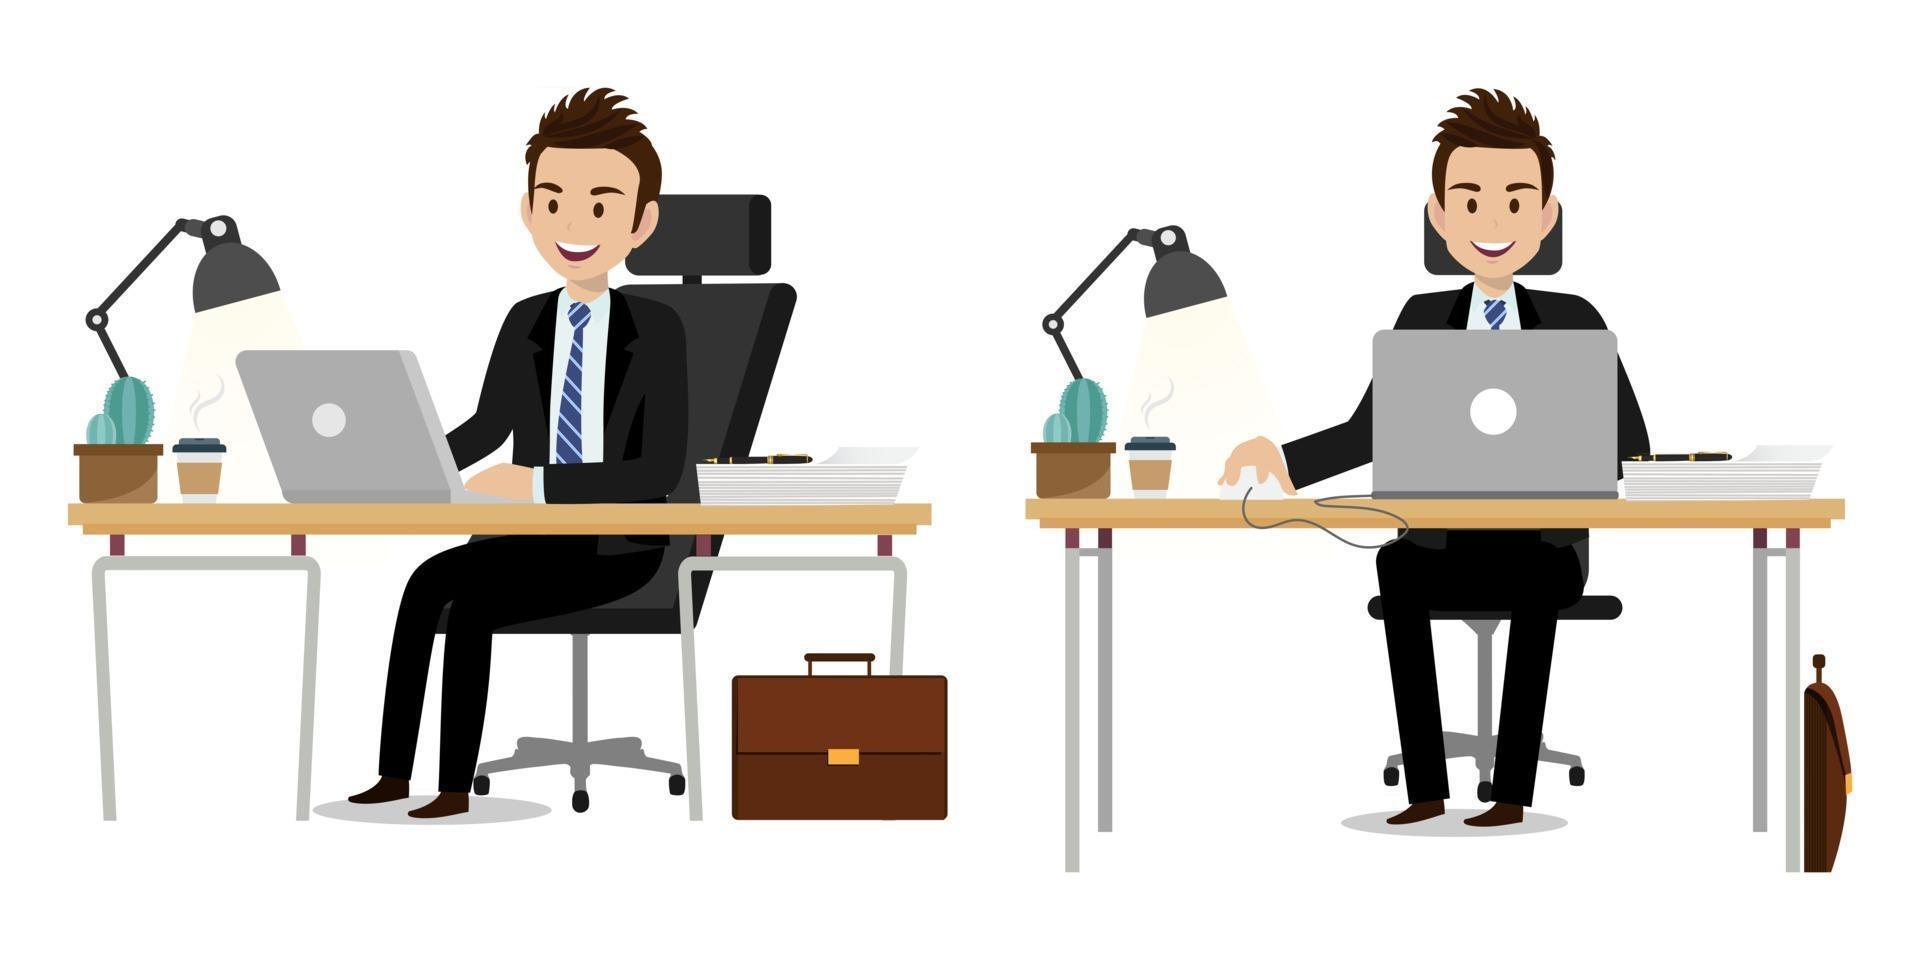 Cartoon character with businessman working character vector design